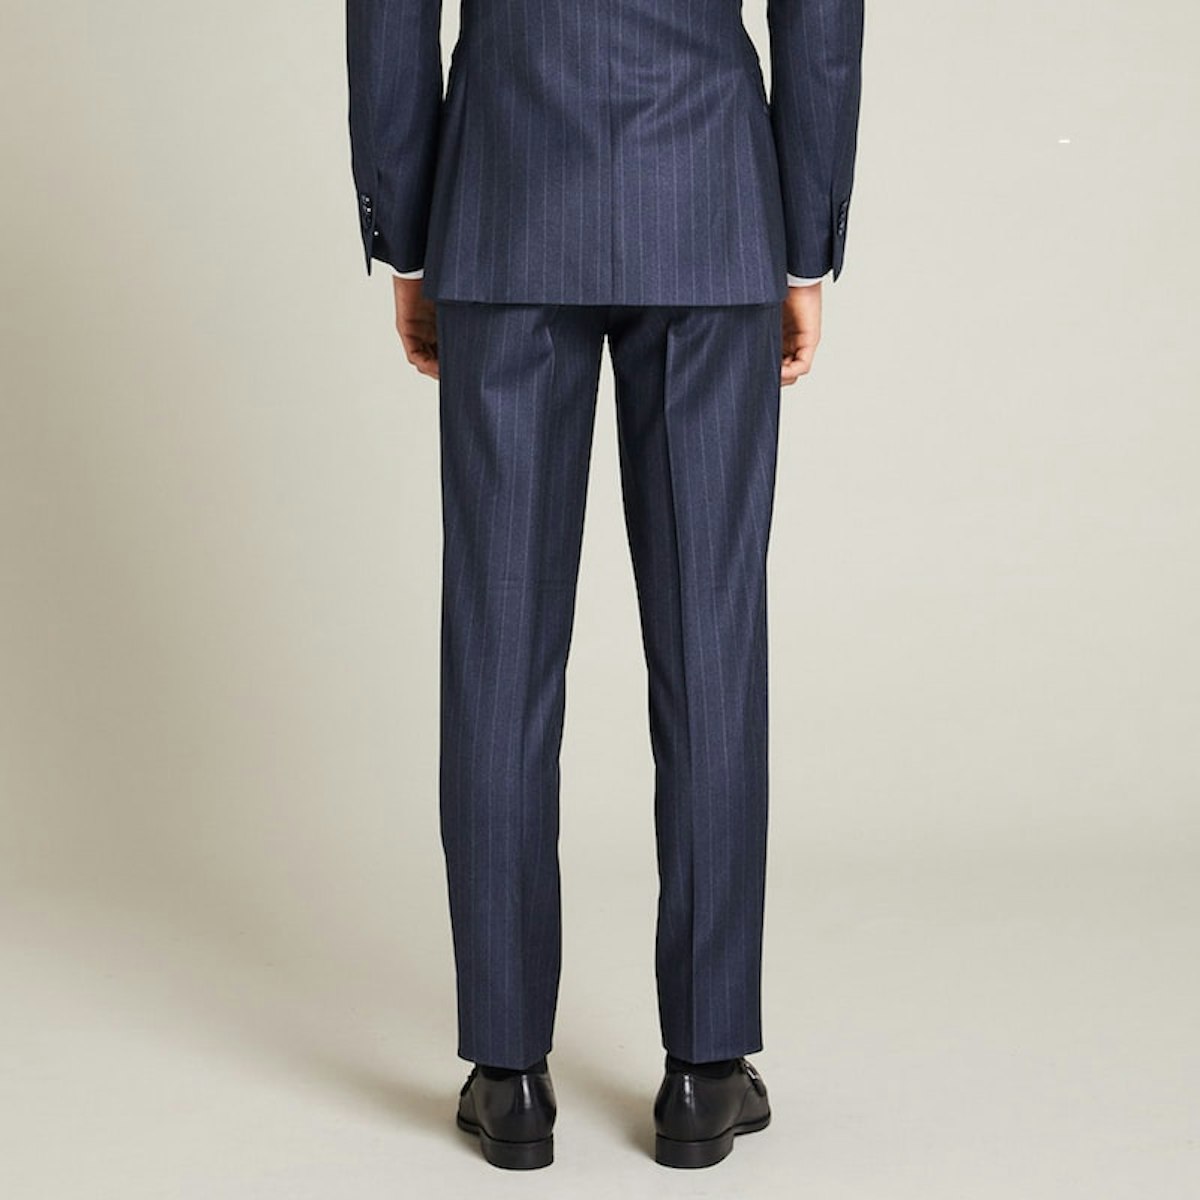 InStitchu Collection The Lander Navy Pinstripe Pants